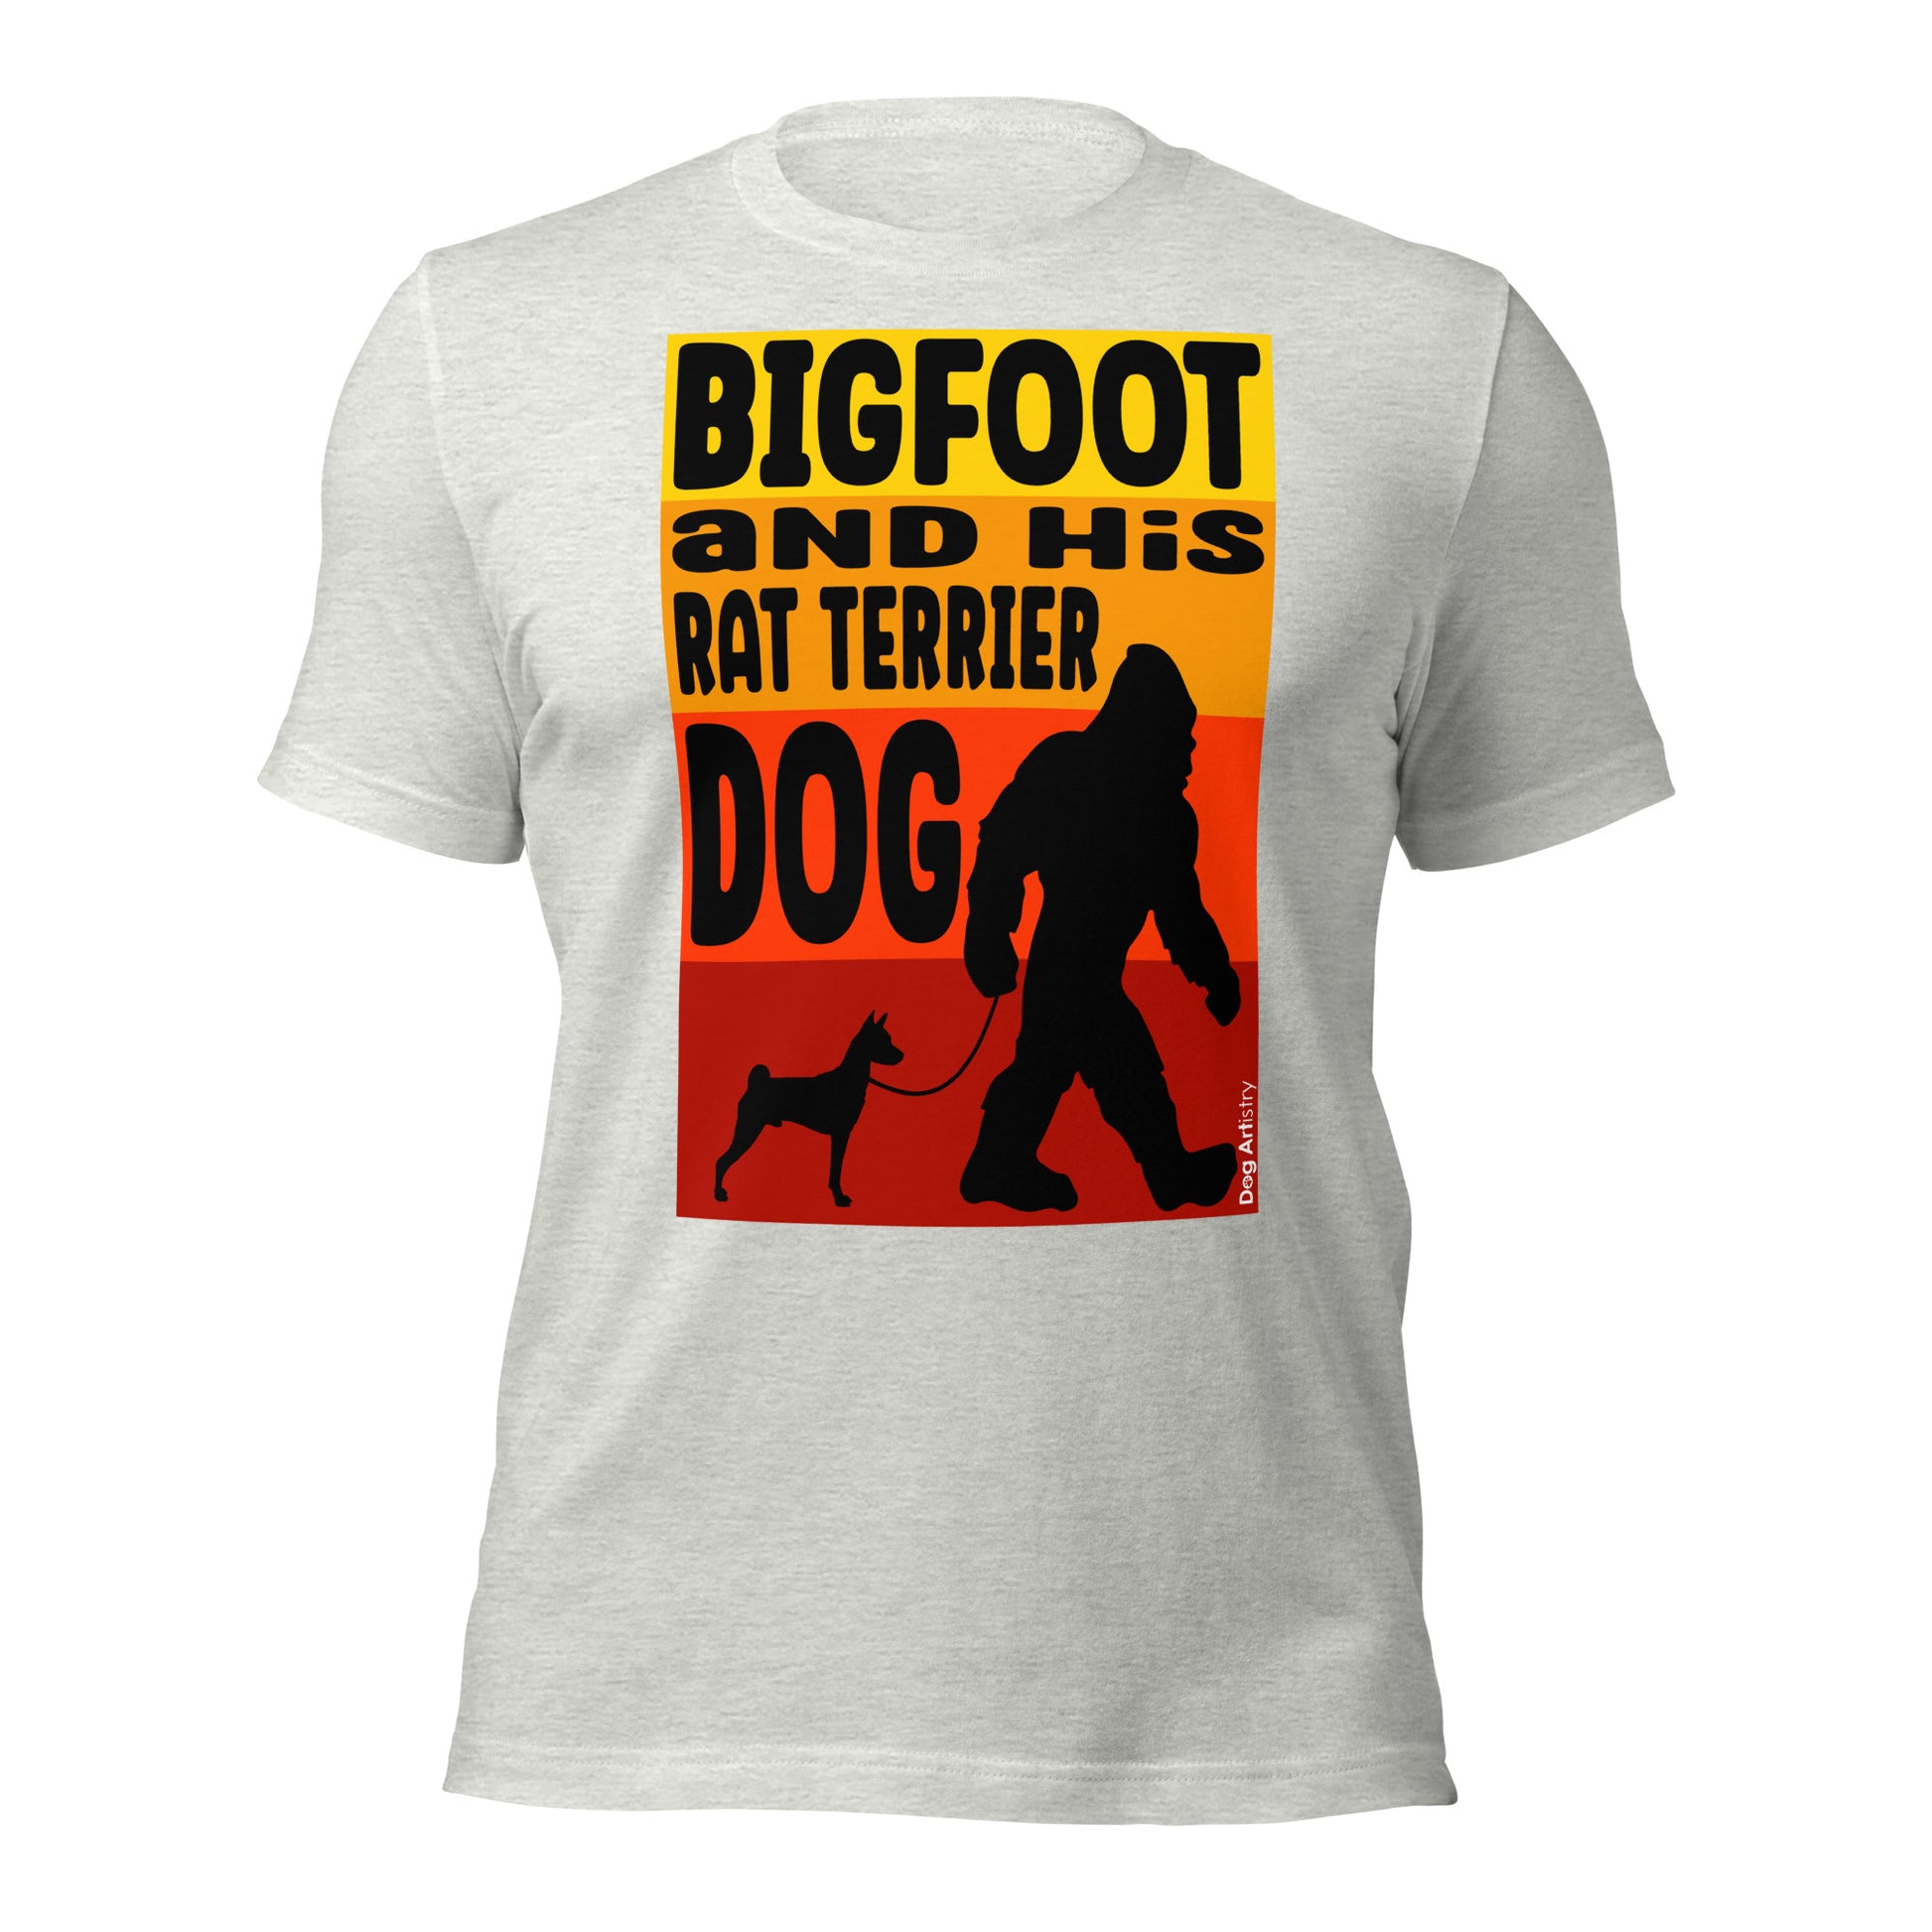 Bigfoot and his Rat Terrier unisex ash t-shirt by Dog Artistry.